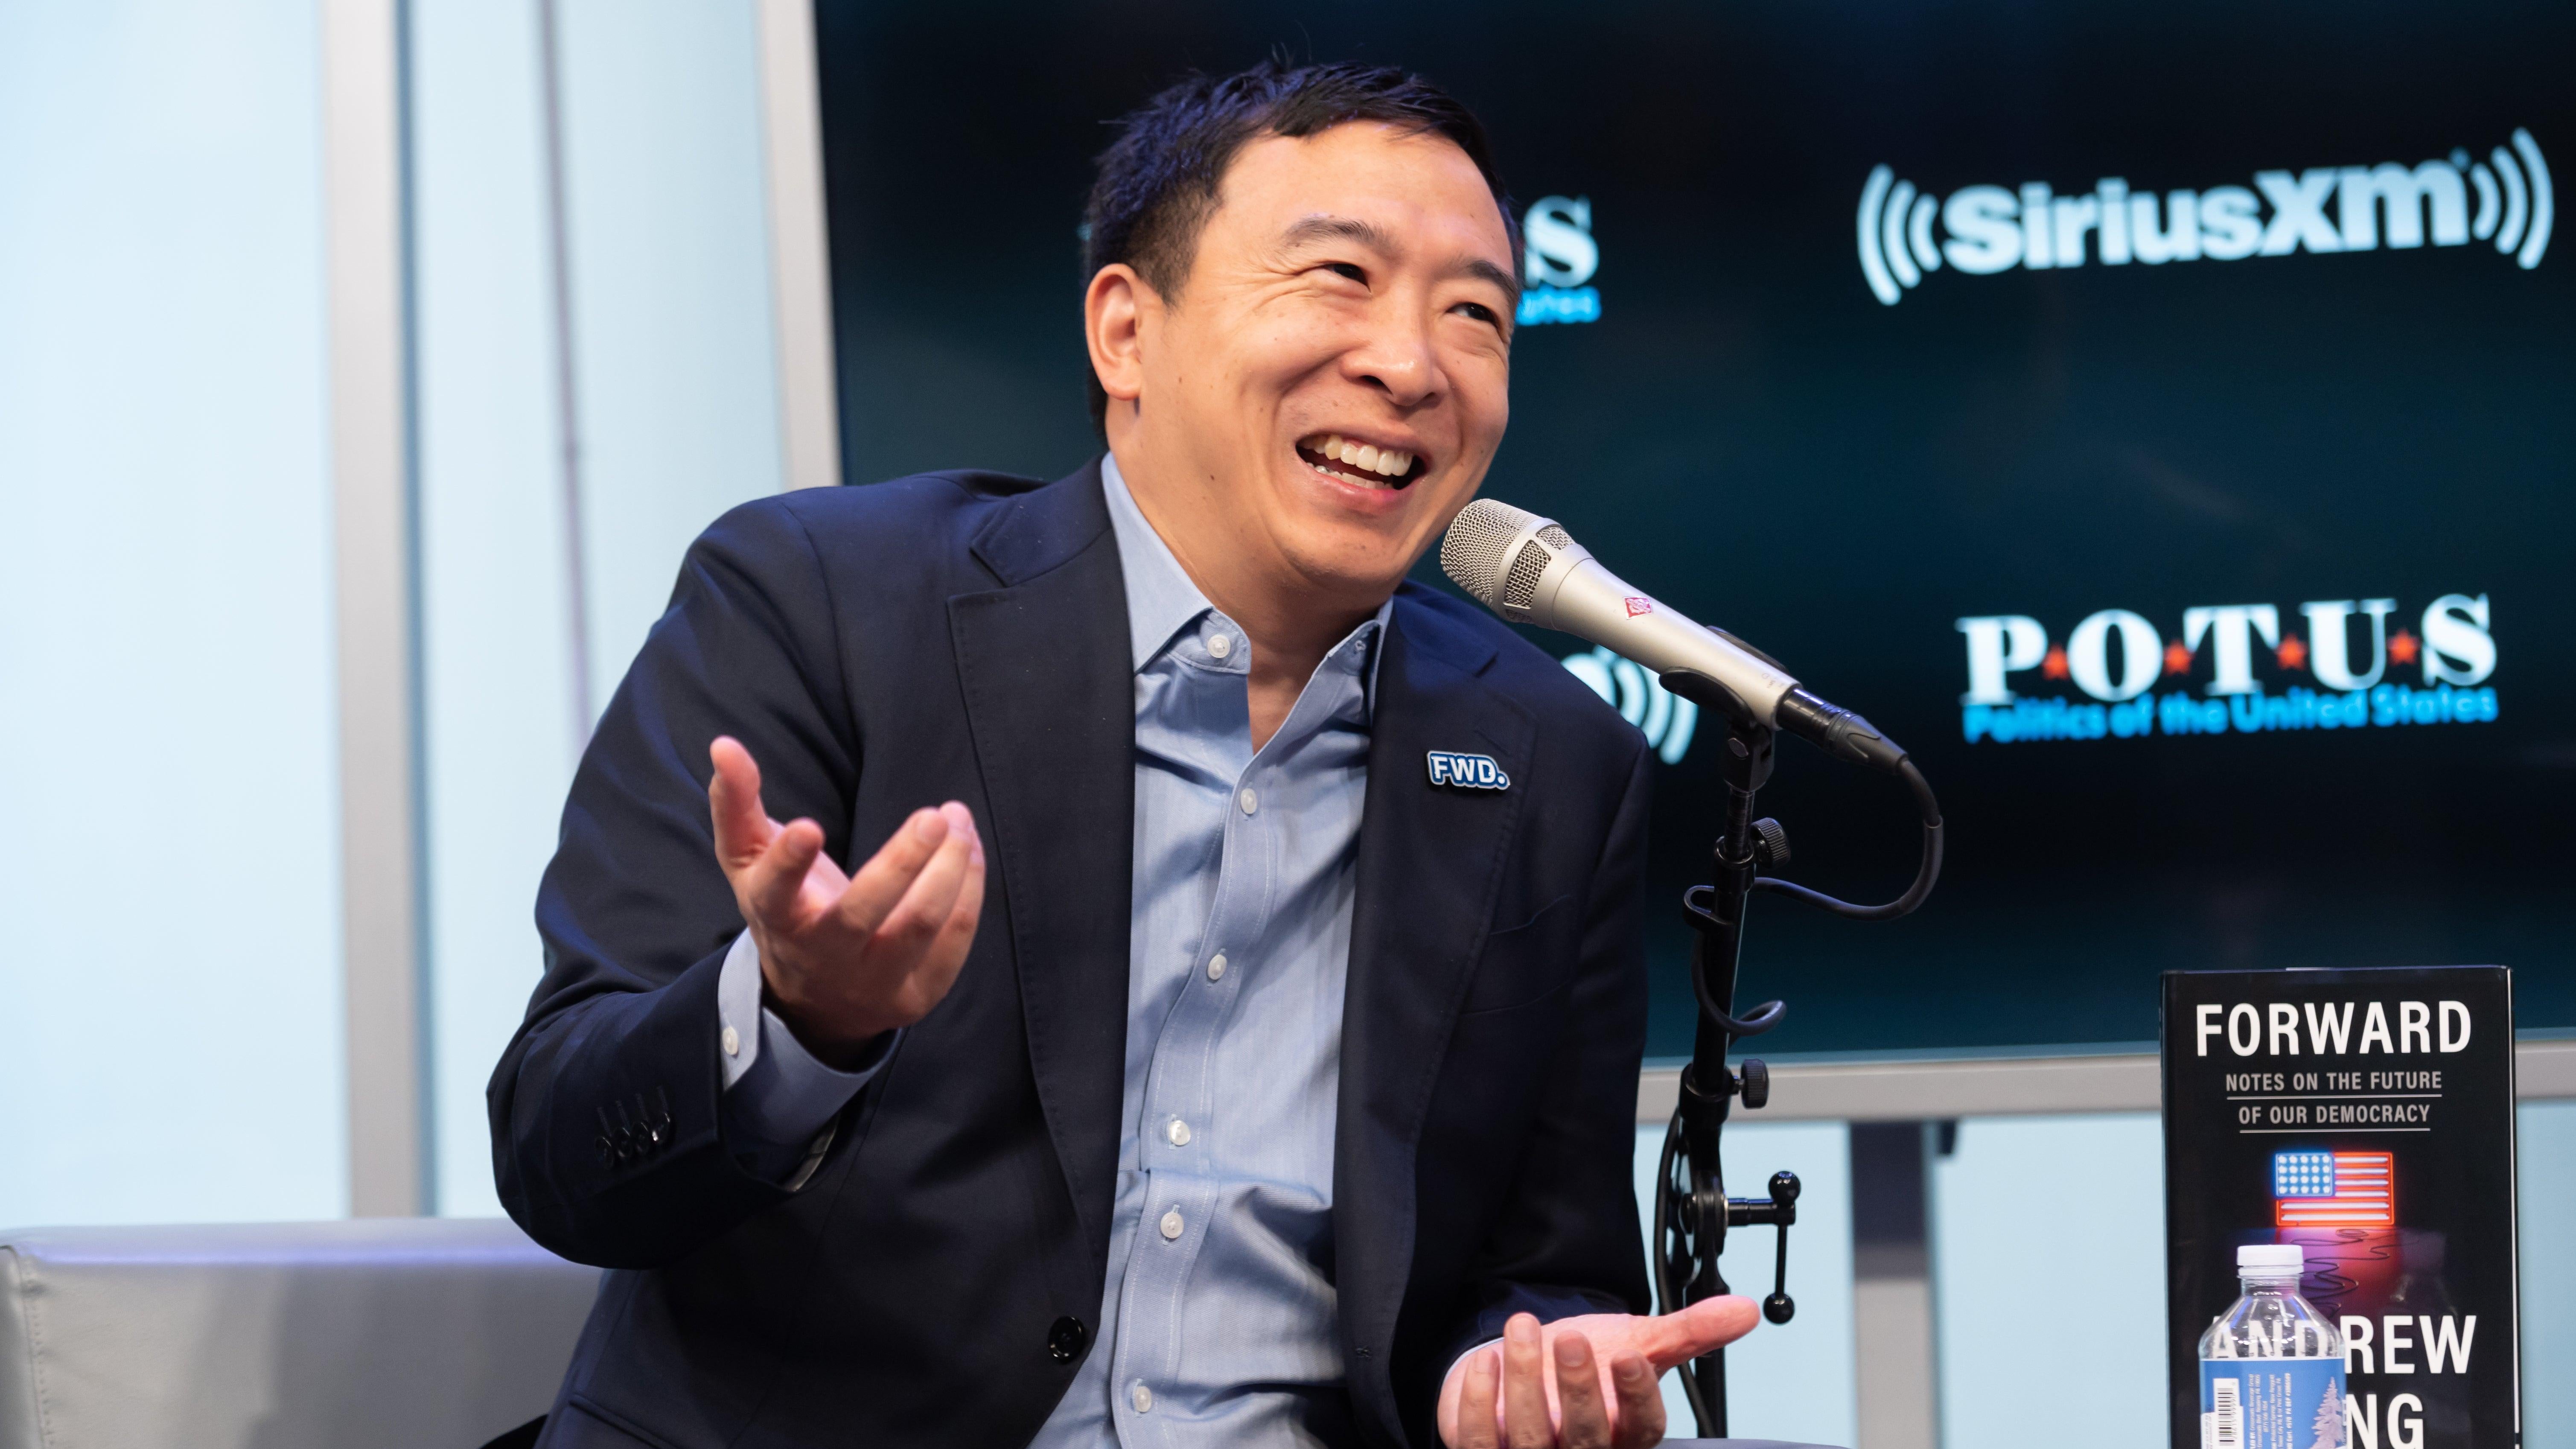 Andrew Yang has long been interested in blockchain technology, but his current Web3 lobbying push truly changes the trajectory of his erstwhile political career. (Photo: Noam Galai, Getty Images)